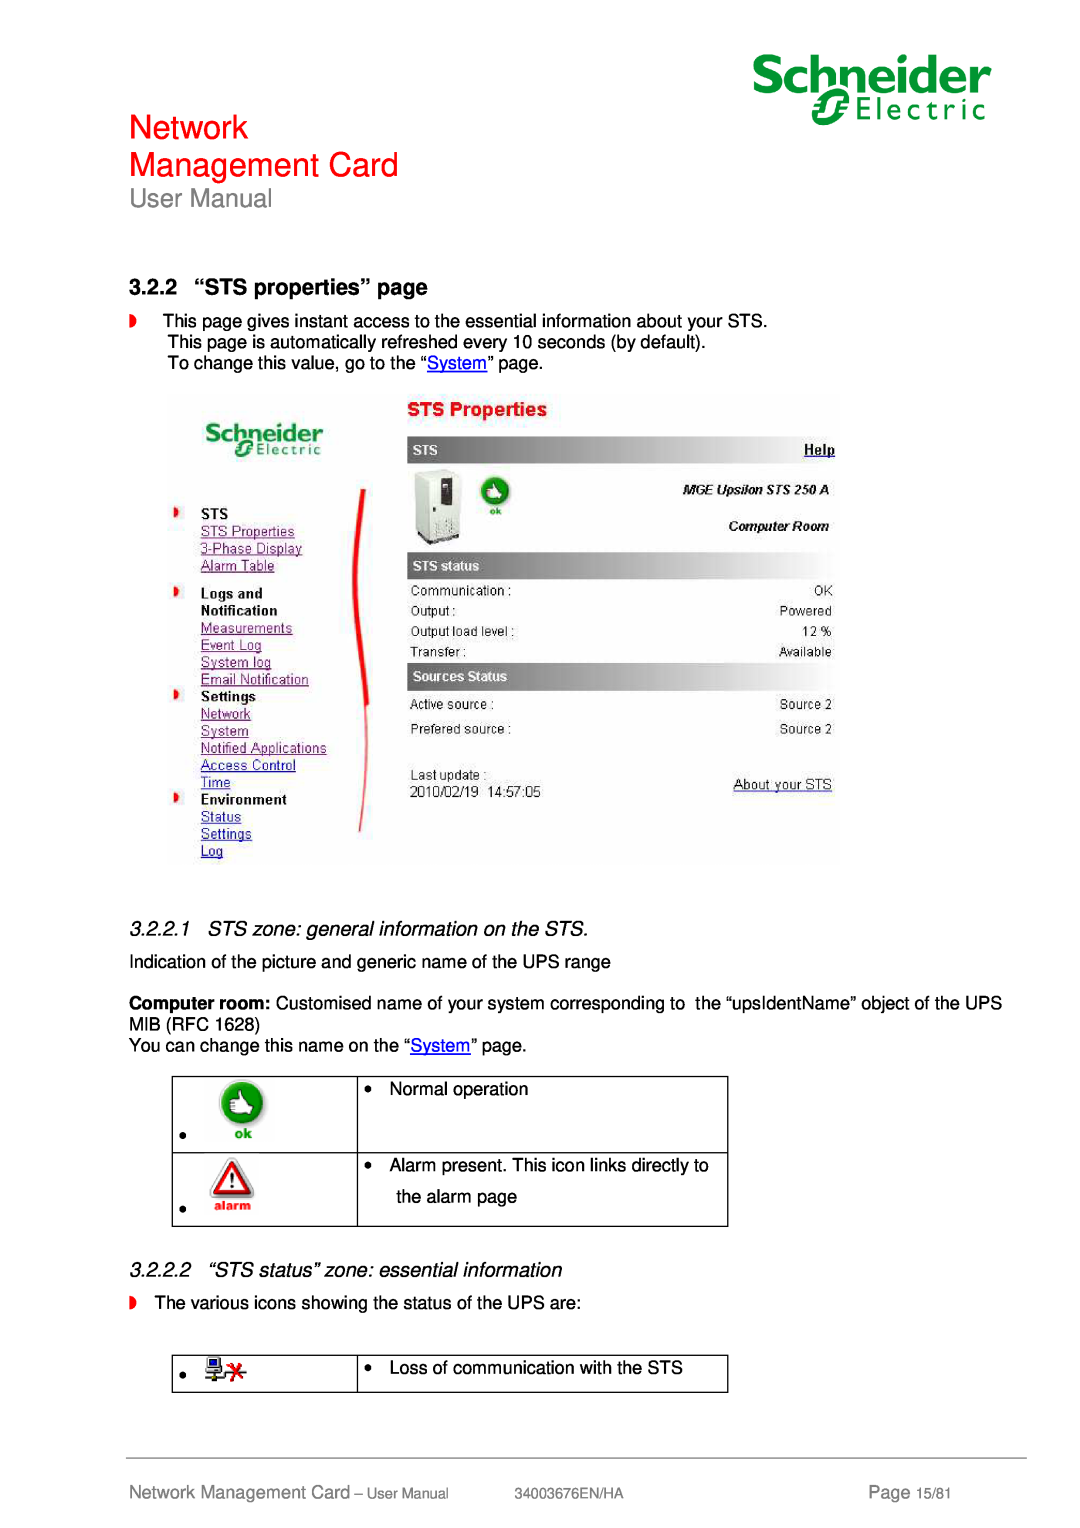 Schneider Electric 66074, 66846 user manual 3.2.2 “STS properties” page, Network Management Card, User Manual, Page 15/81 